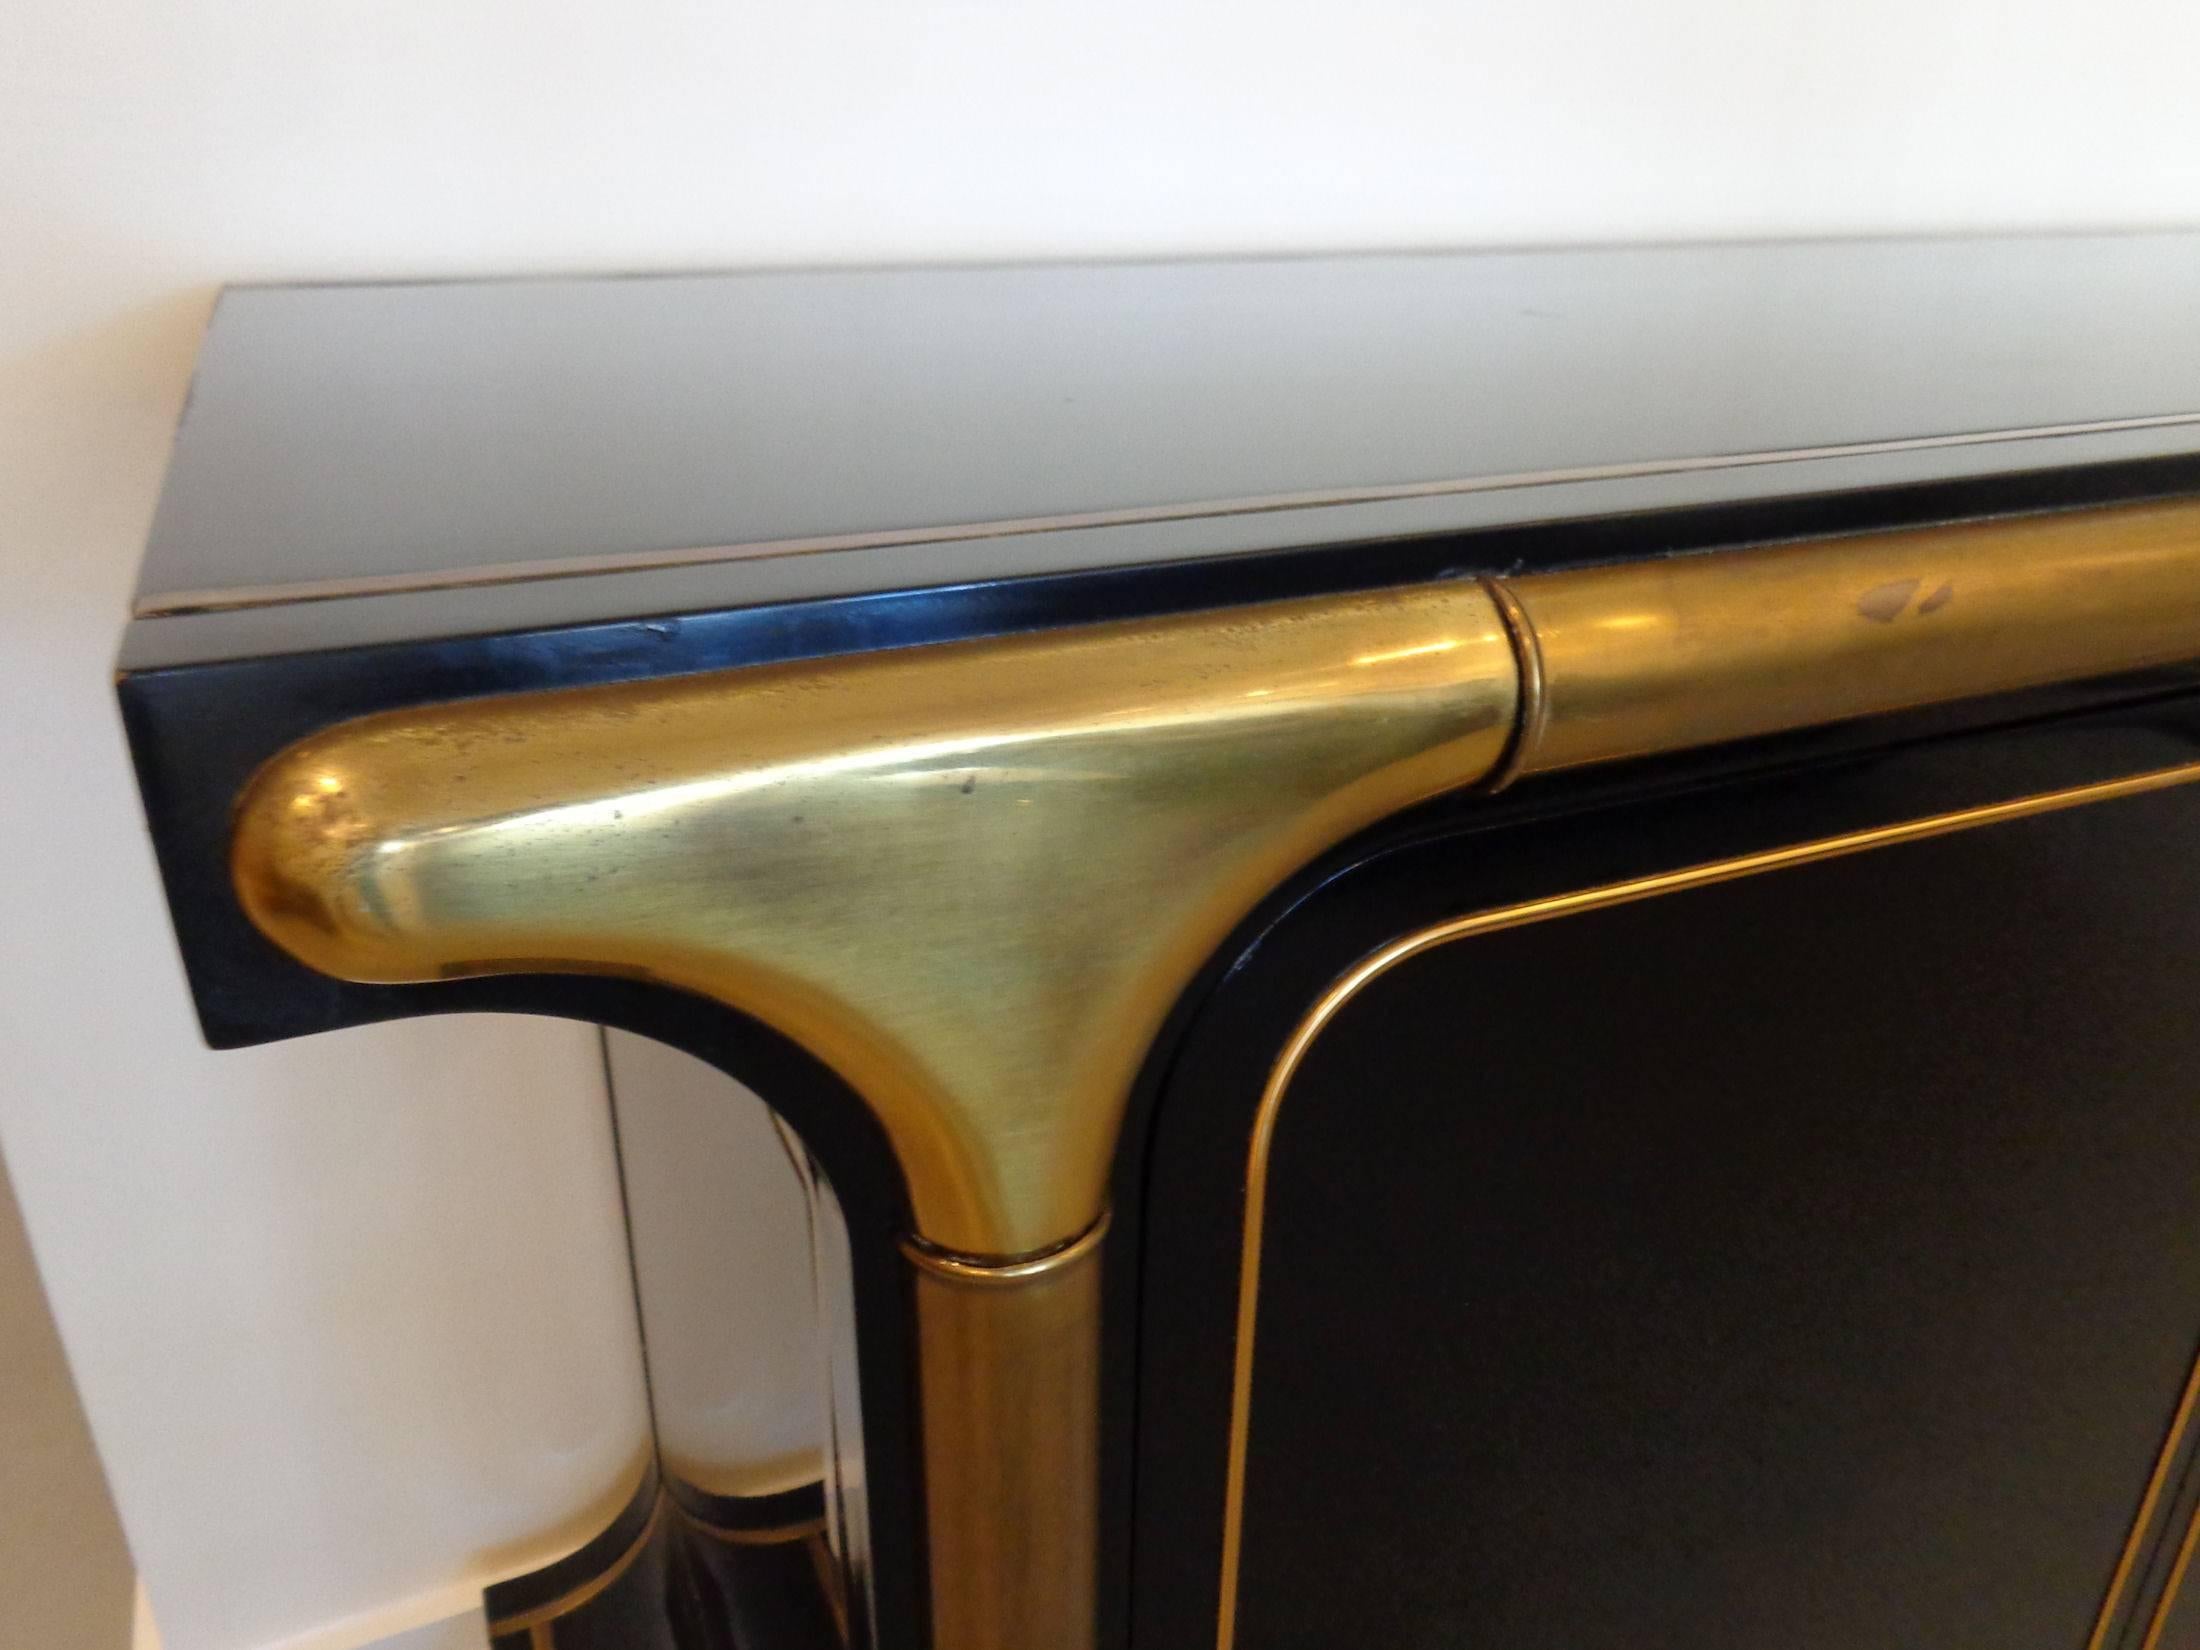 Lacquered Mastercraft credenza with brass details in nice as found vintage condition.